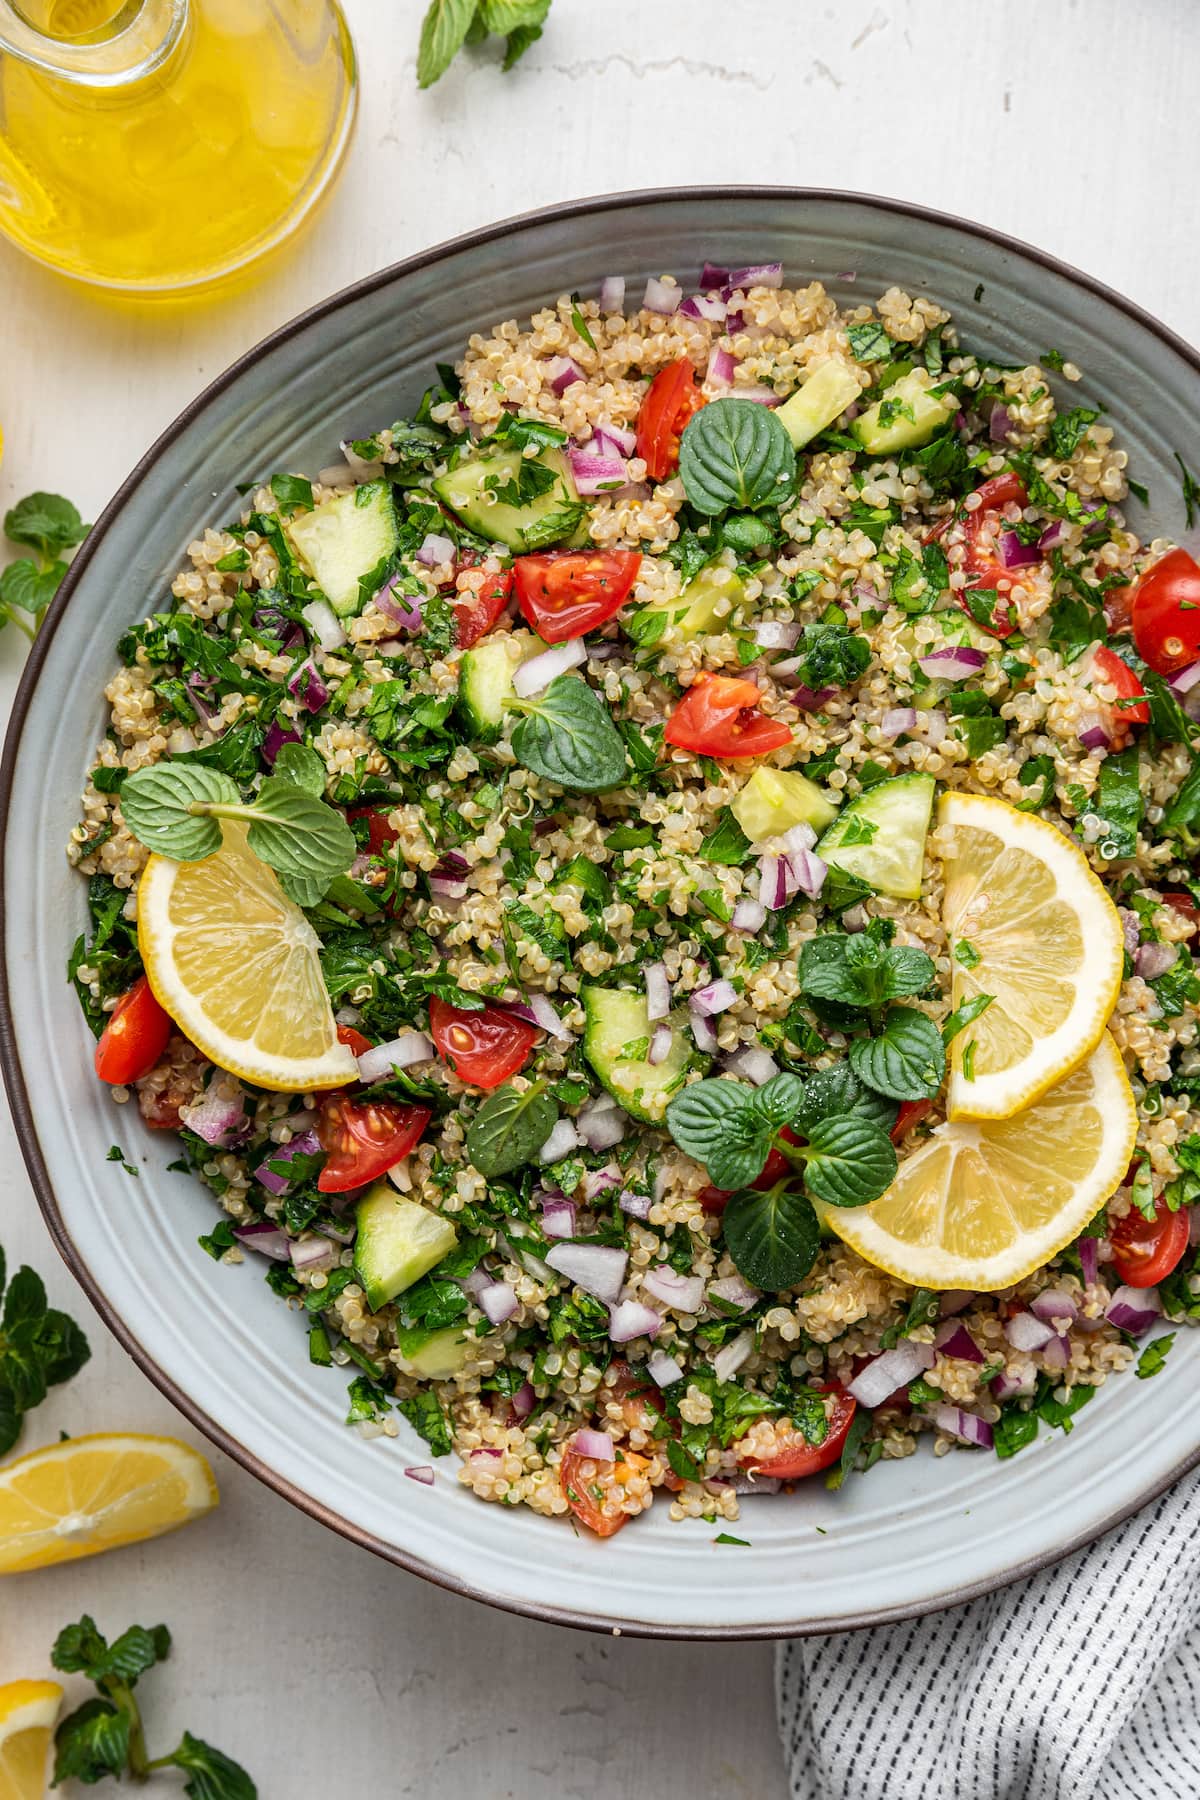 Quinoa tabbouleh in a serving bowl topped with fresh lemon slices and fresh herbs.